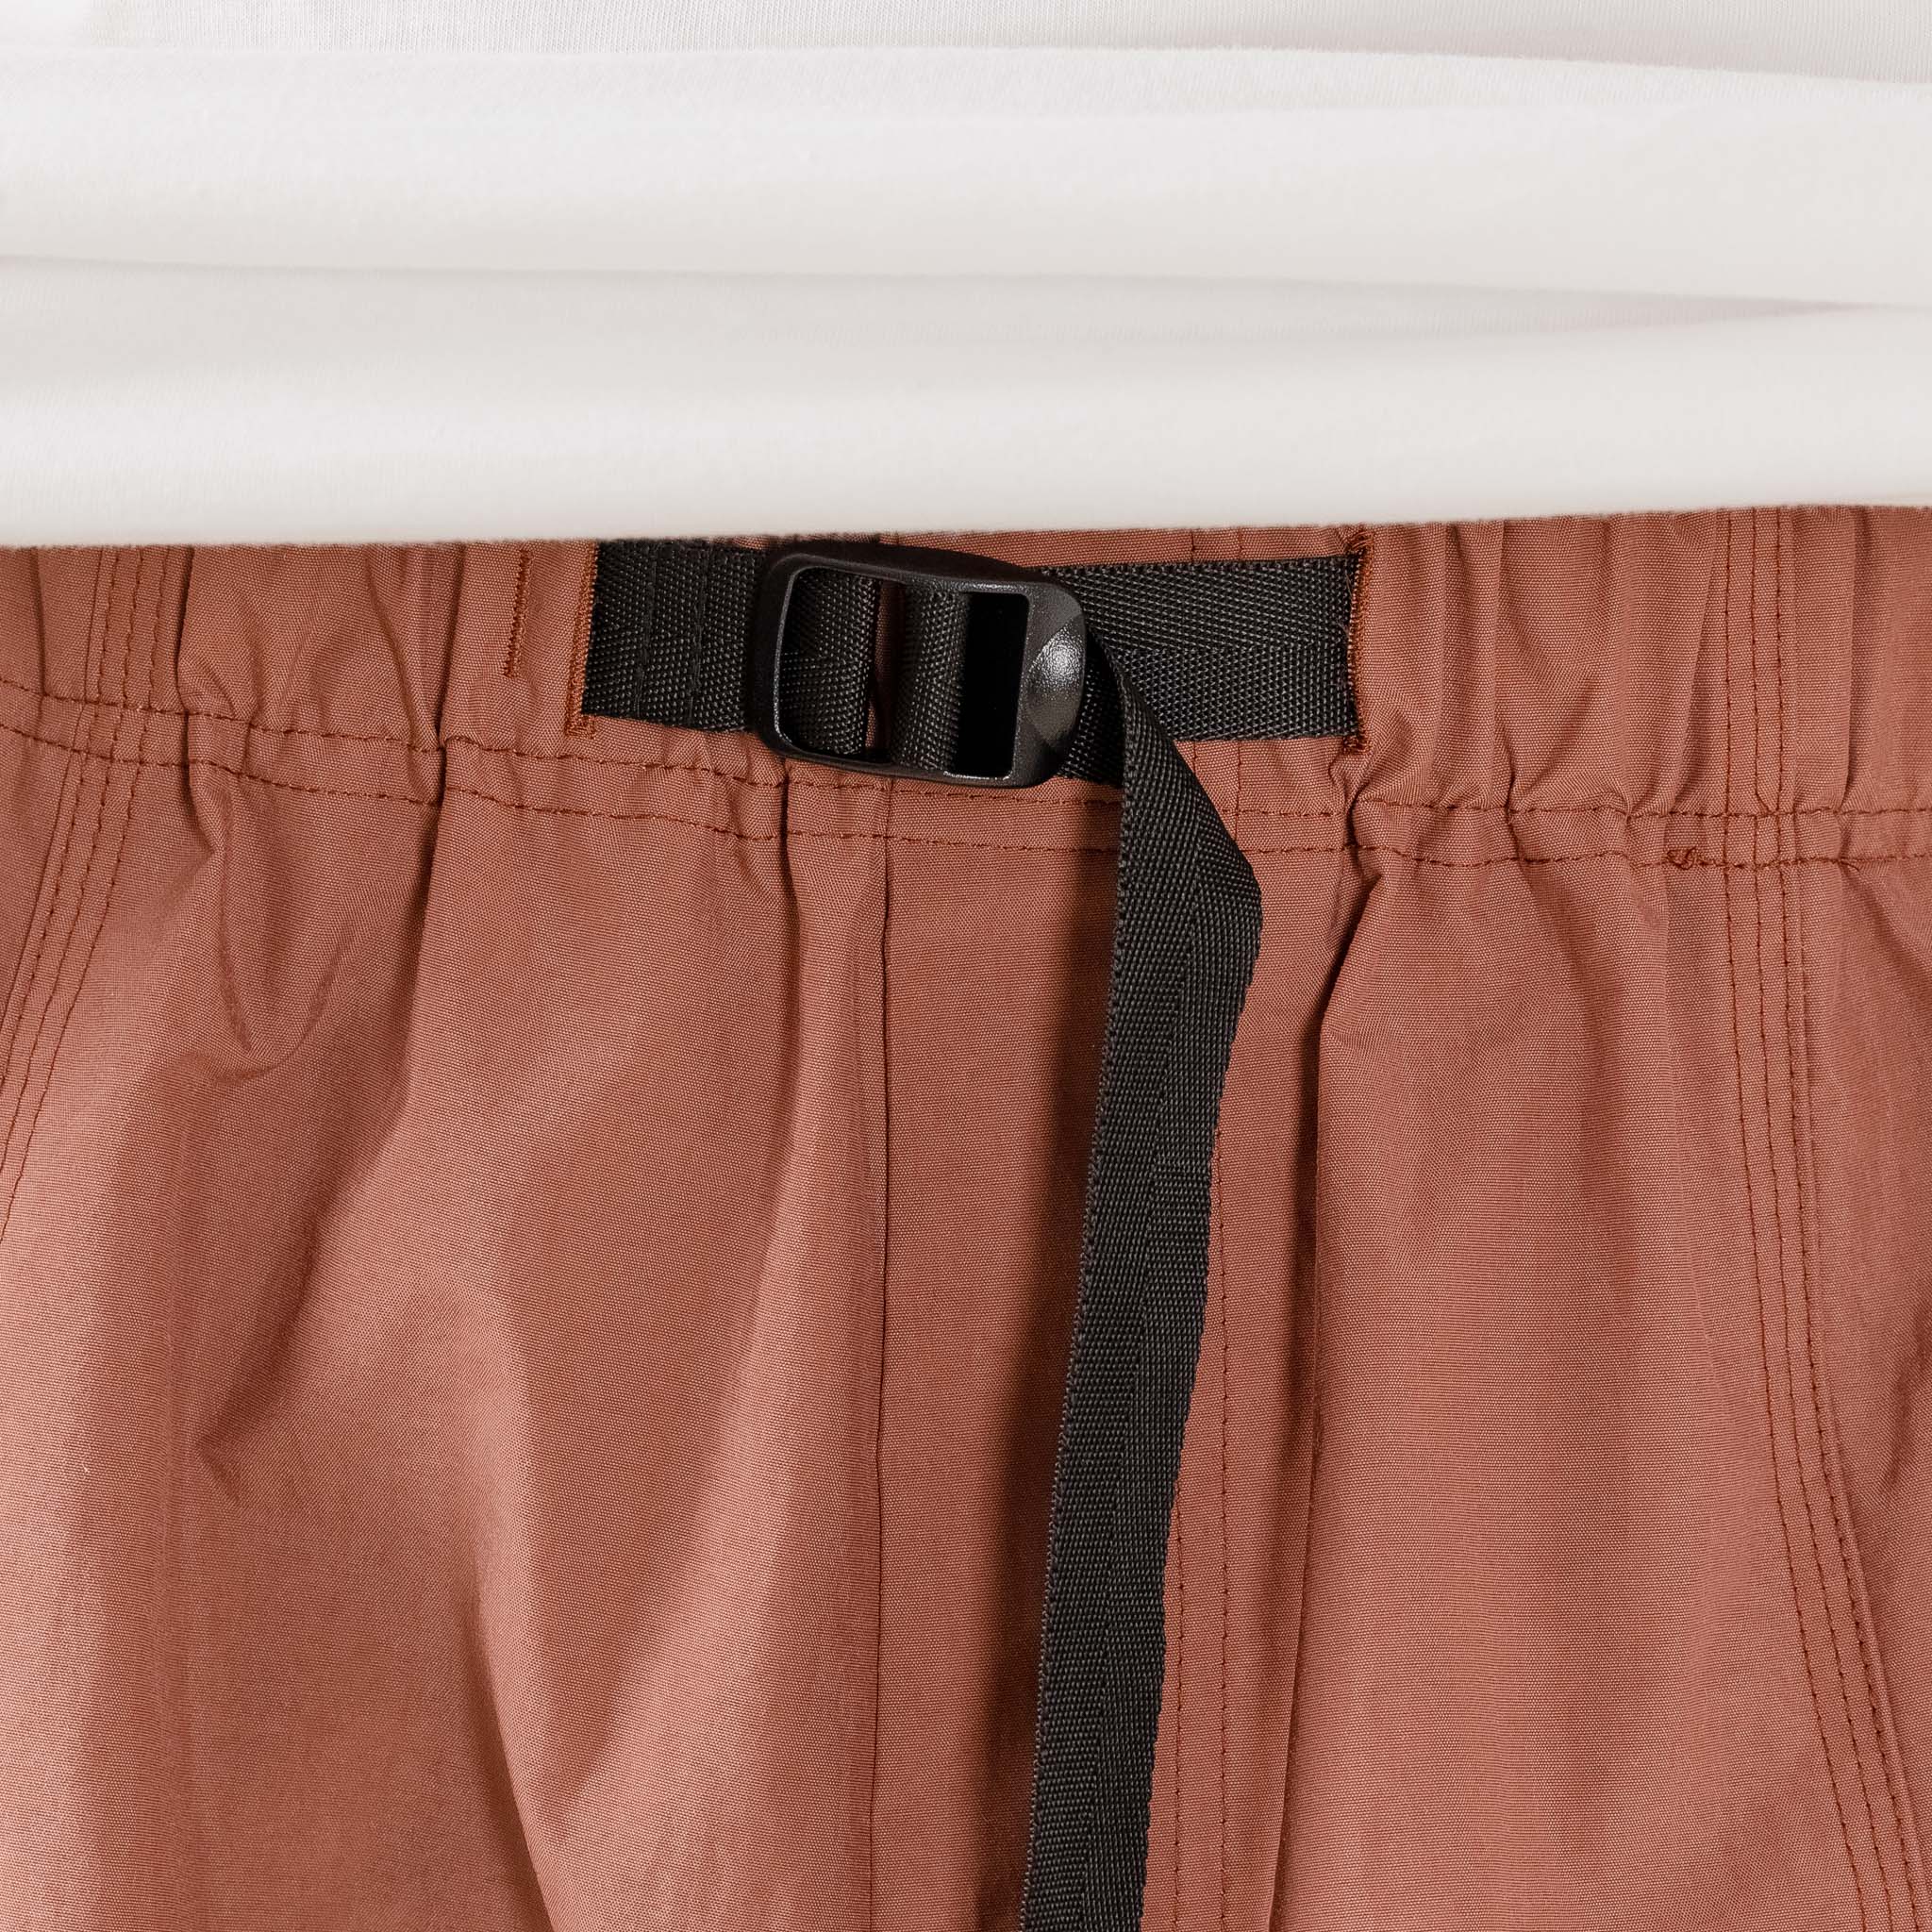 South2 West8 - C.S Shorts Nylon Taffeta - Old Rose "south 2 west 8" "s2w8" "s2w8 stockists" "south 2 west 8 stockists" "south 2 west 8 sale" "south 2 west 8 uk" "south 2 west 8 USA" "nepenthes" "nepenthes London"